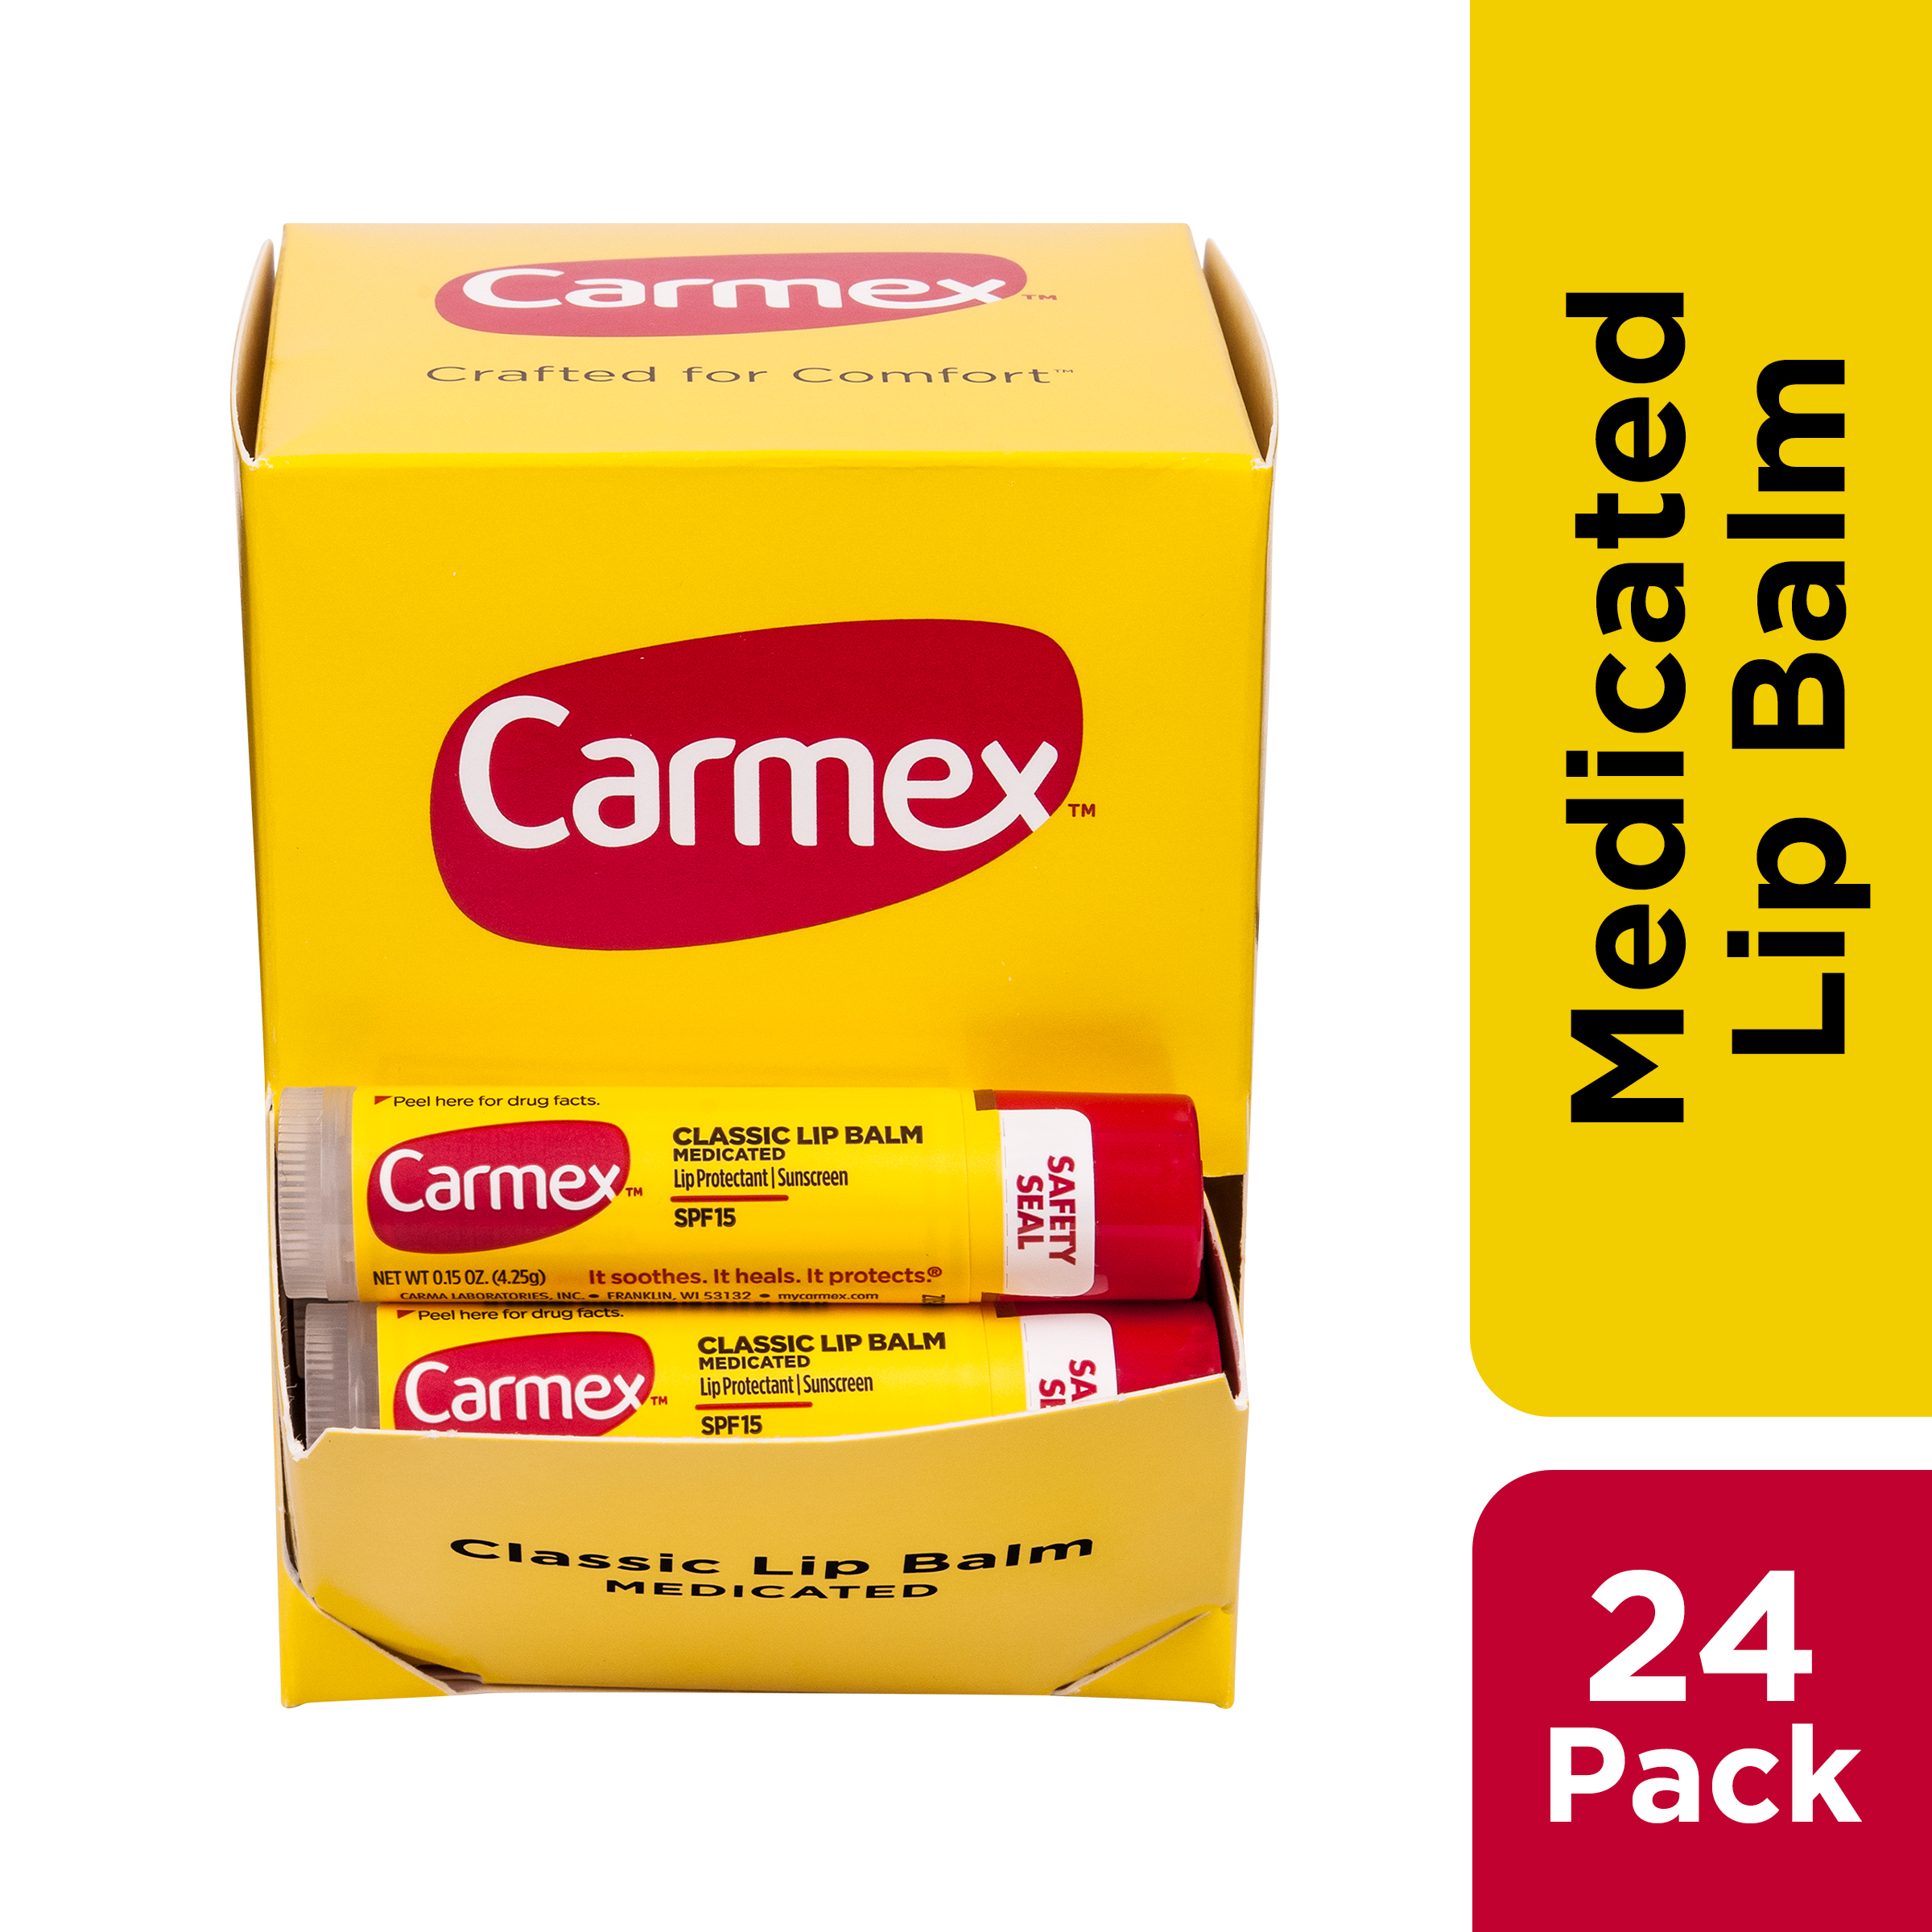 Carmex Moisturizing Medicated Lip Balm with Cocoa Butter, Camphor & Menthol, Multi-Flavor, 24 Pack - image 1 of 11